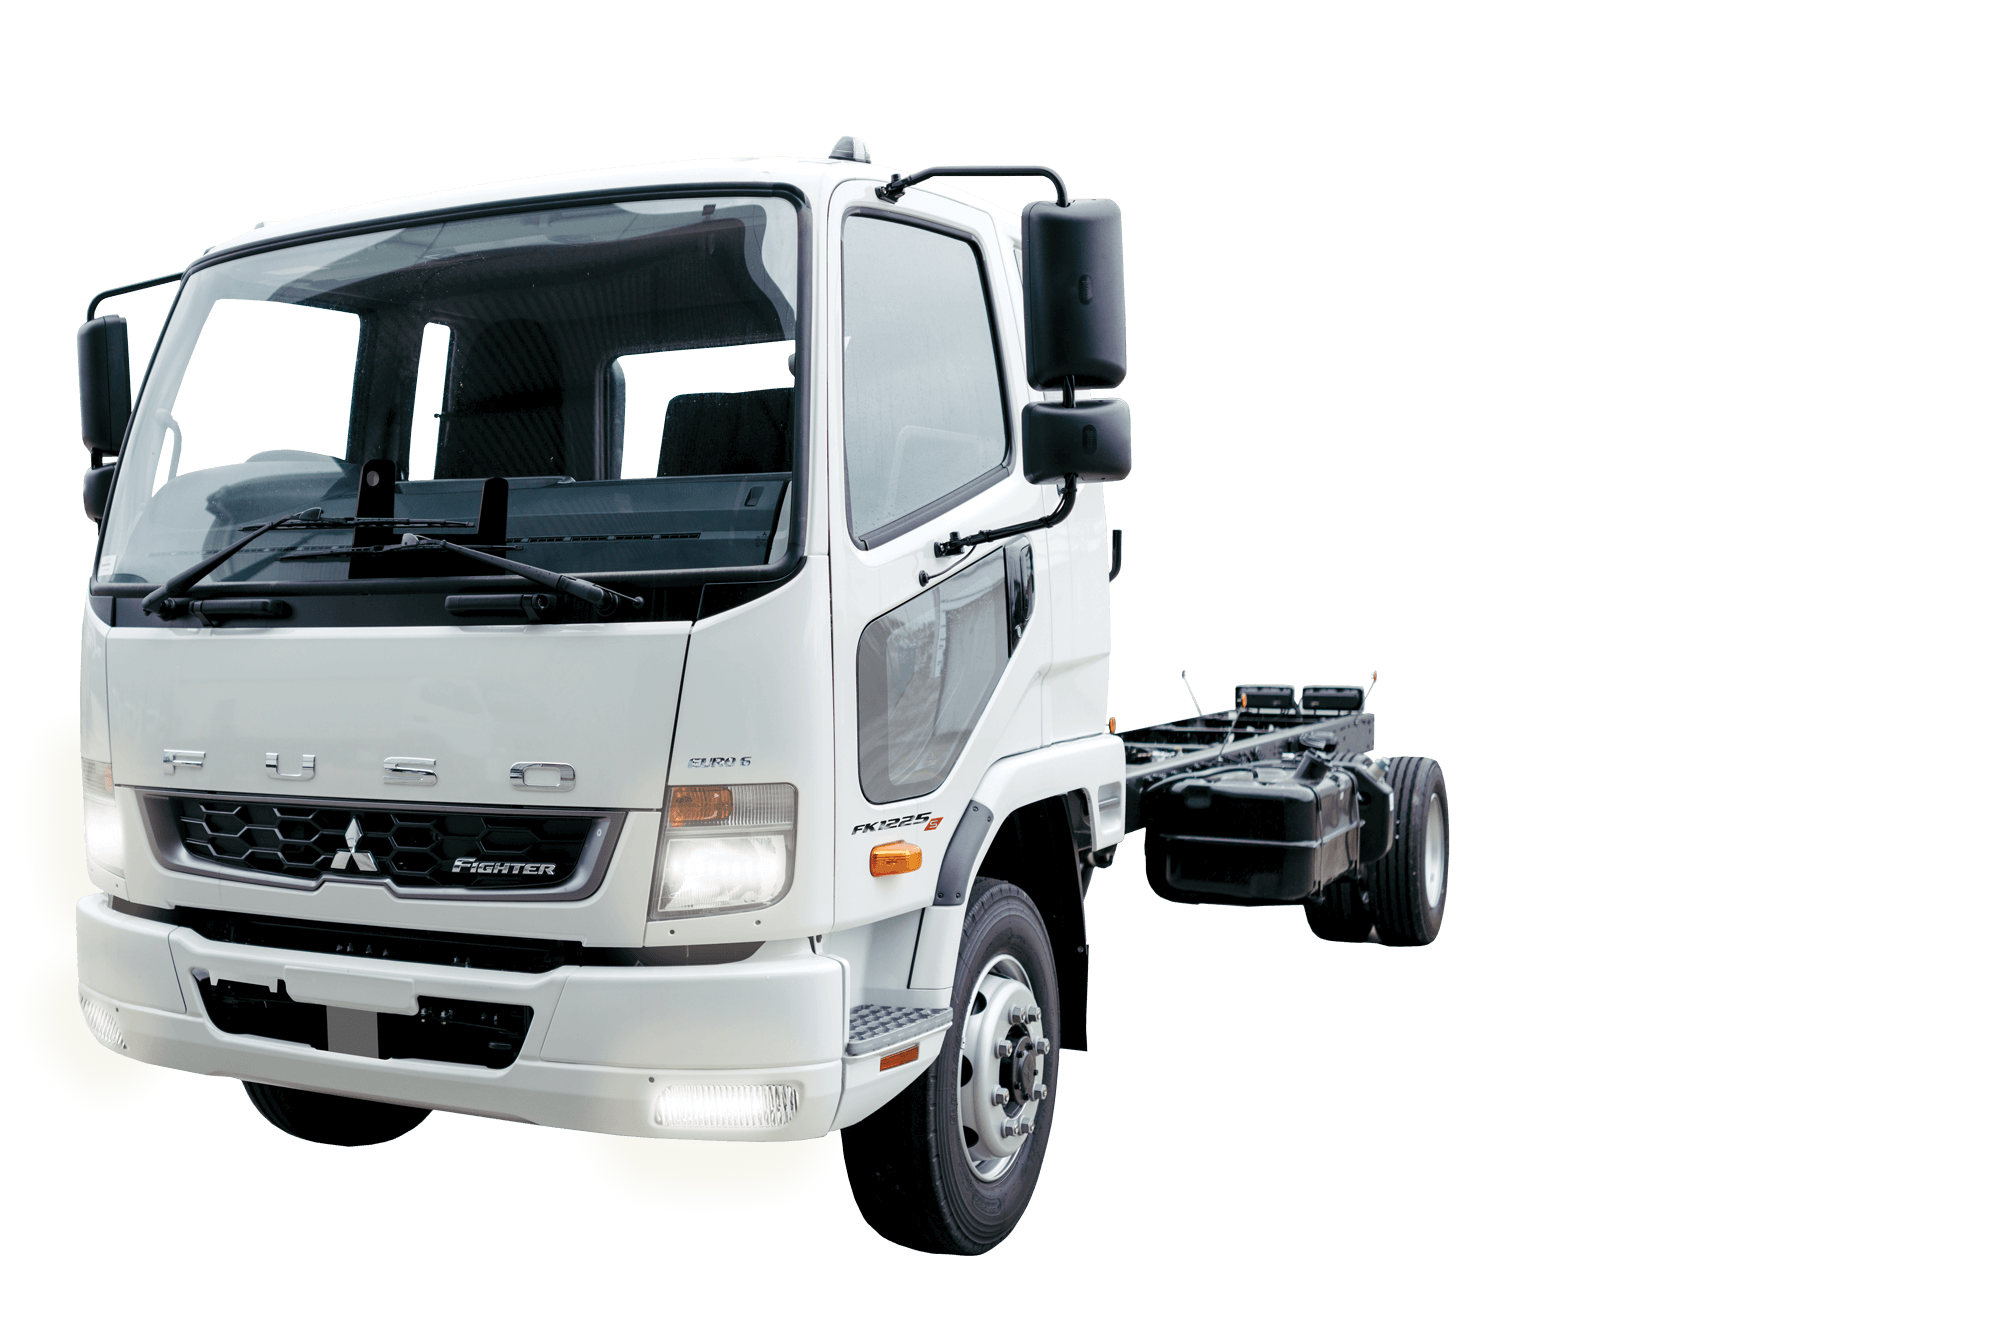 FUSO Fighter bus